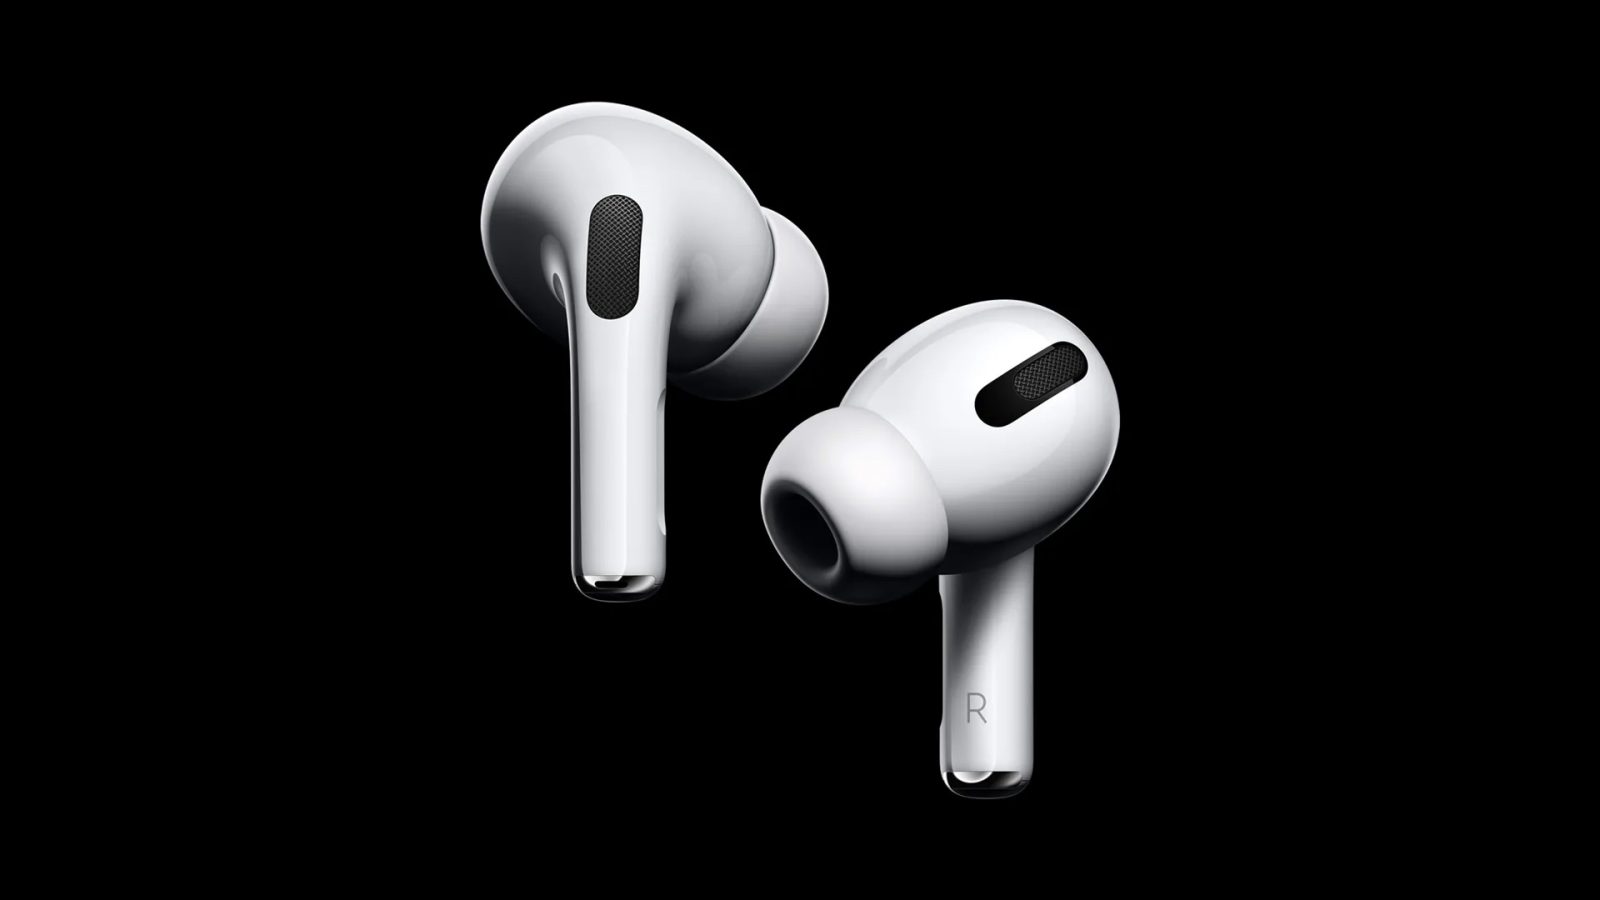 AirPods Pro 2 unlikely to feature heart rate or body temperature features, report says